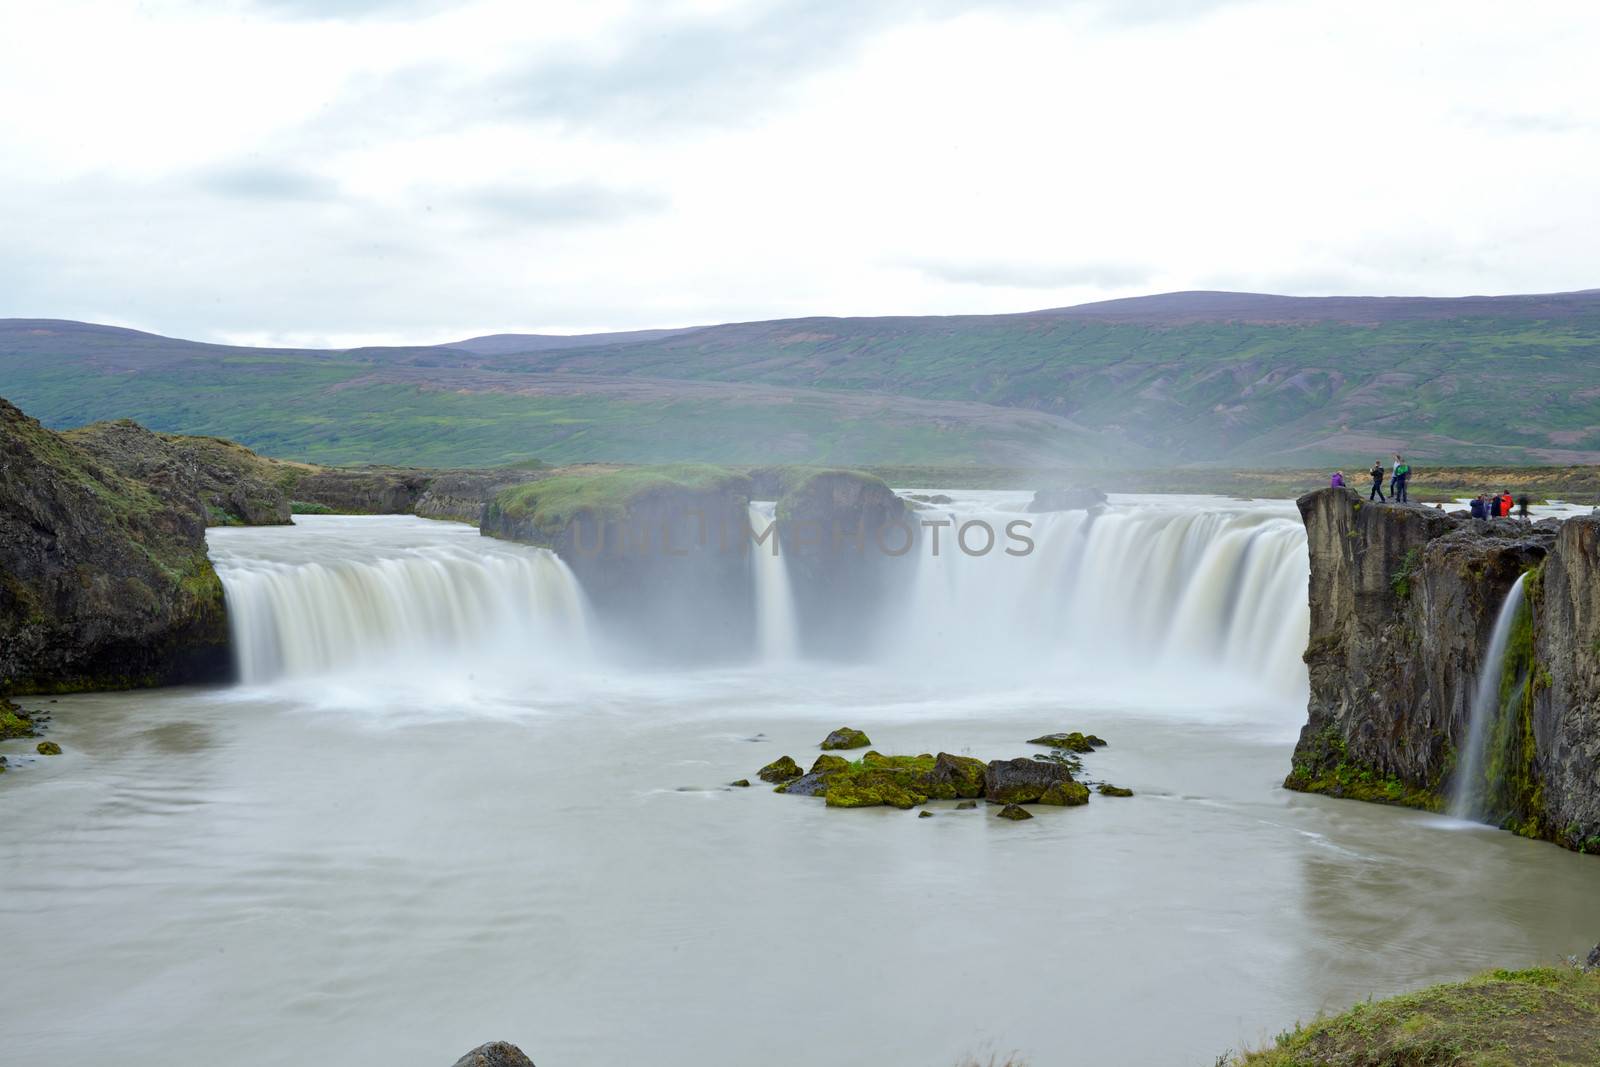 Godafoss, 'Fall of the Gods', one of the most famous and beautiful falls in Iceland.